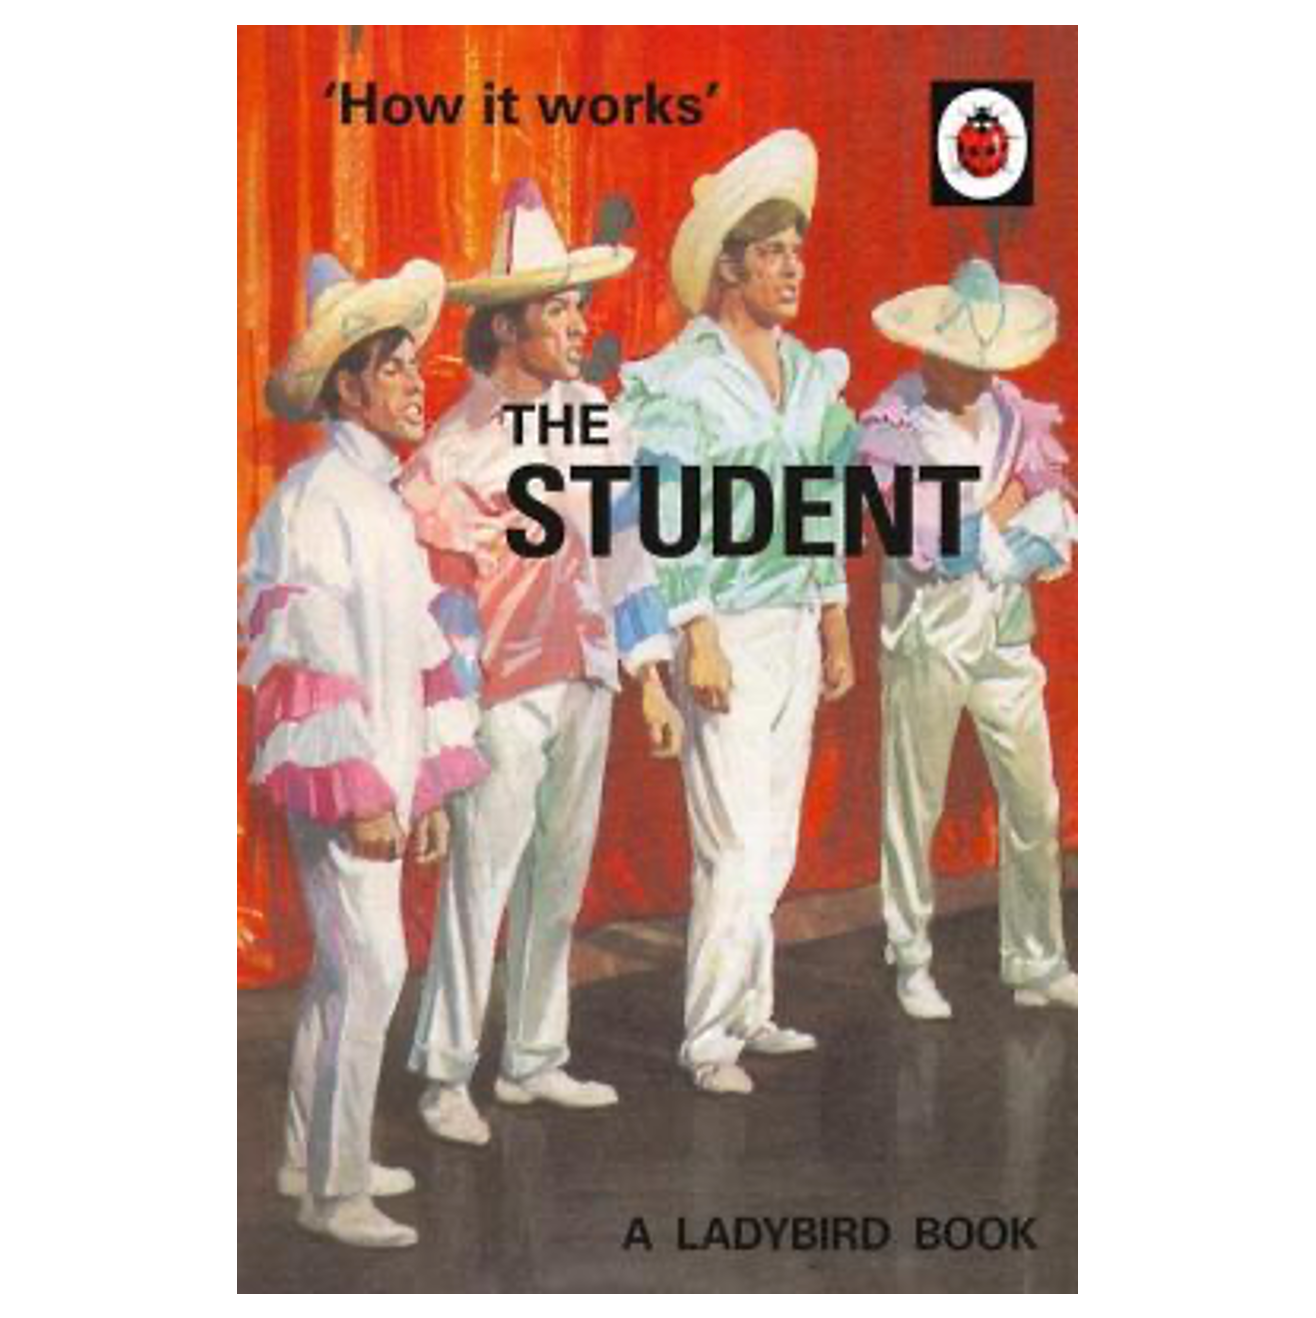 The Ladybird Book The Student